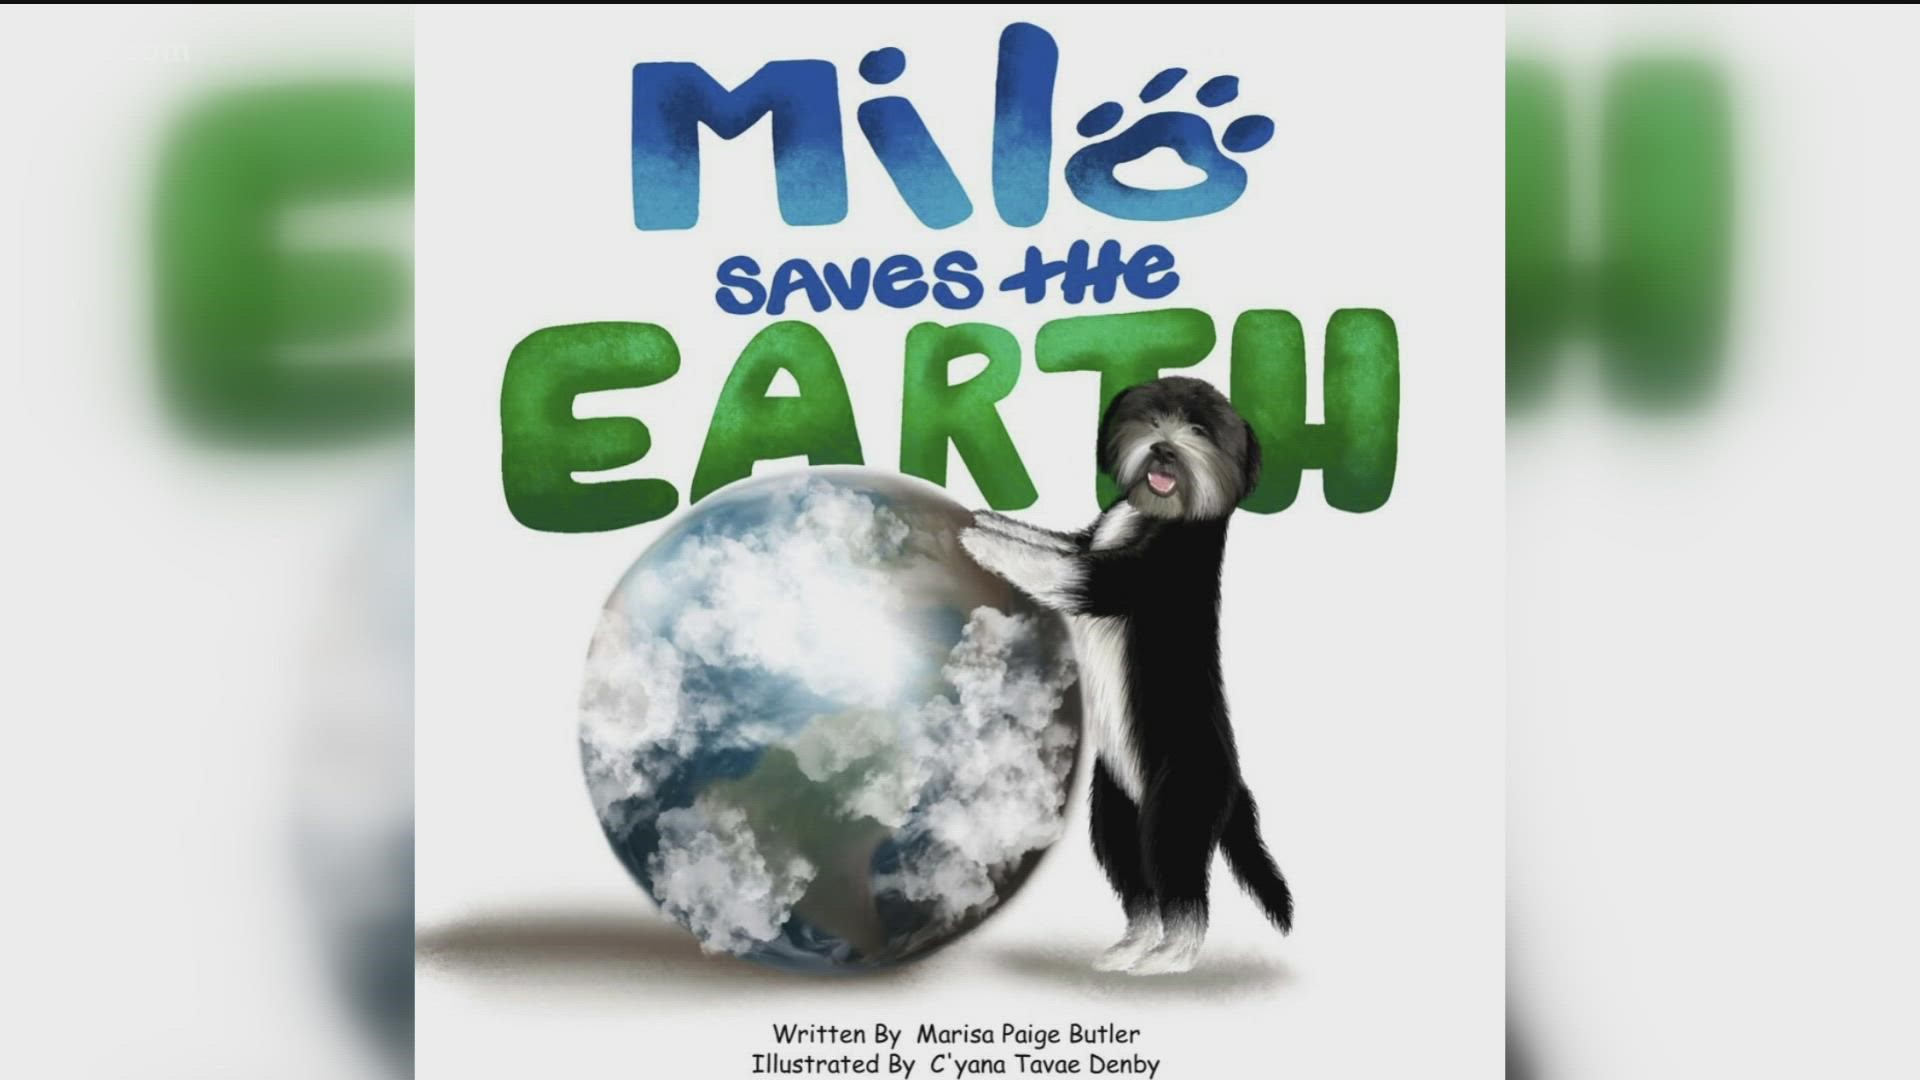 Miss Earth USA 2021 and her dog Milo wants to inspire kids to save the earth with a new children’s book, "Milo Saves The Earth".